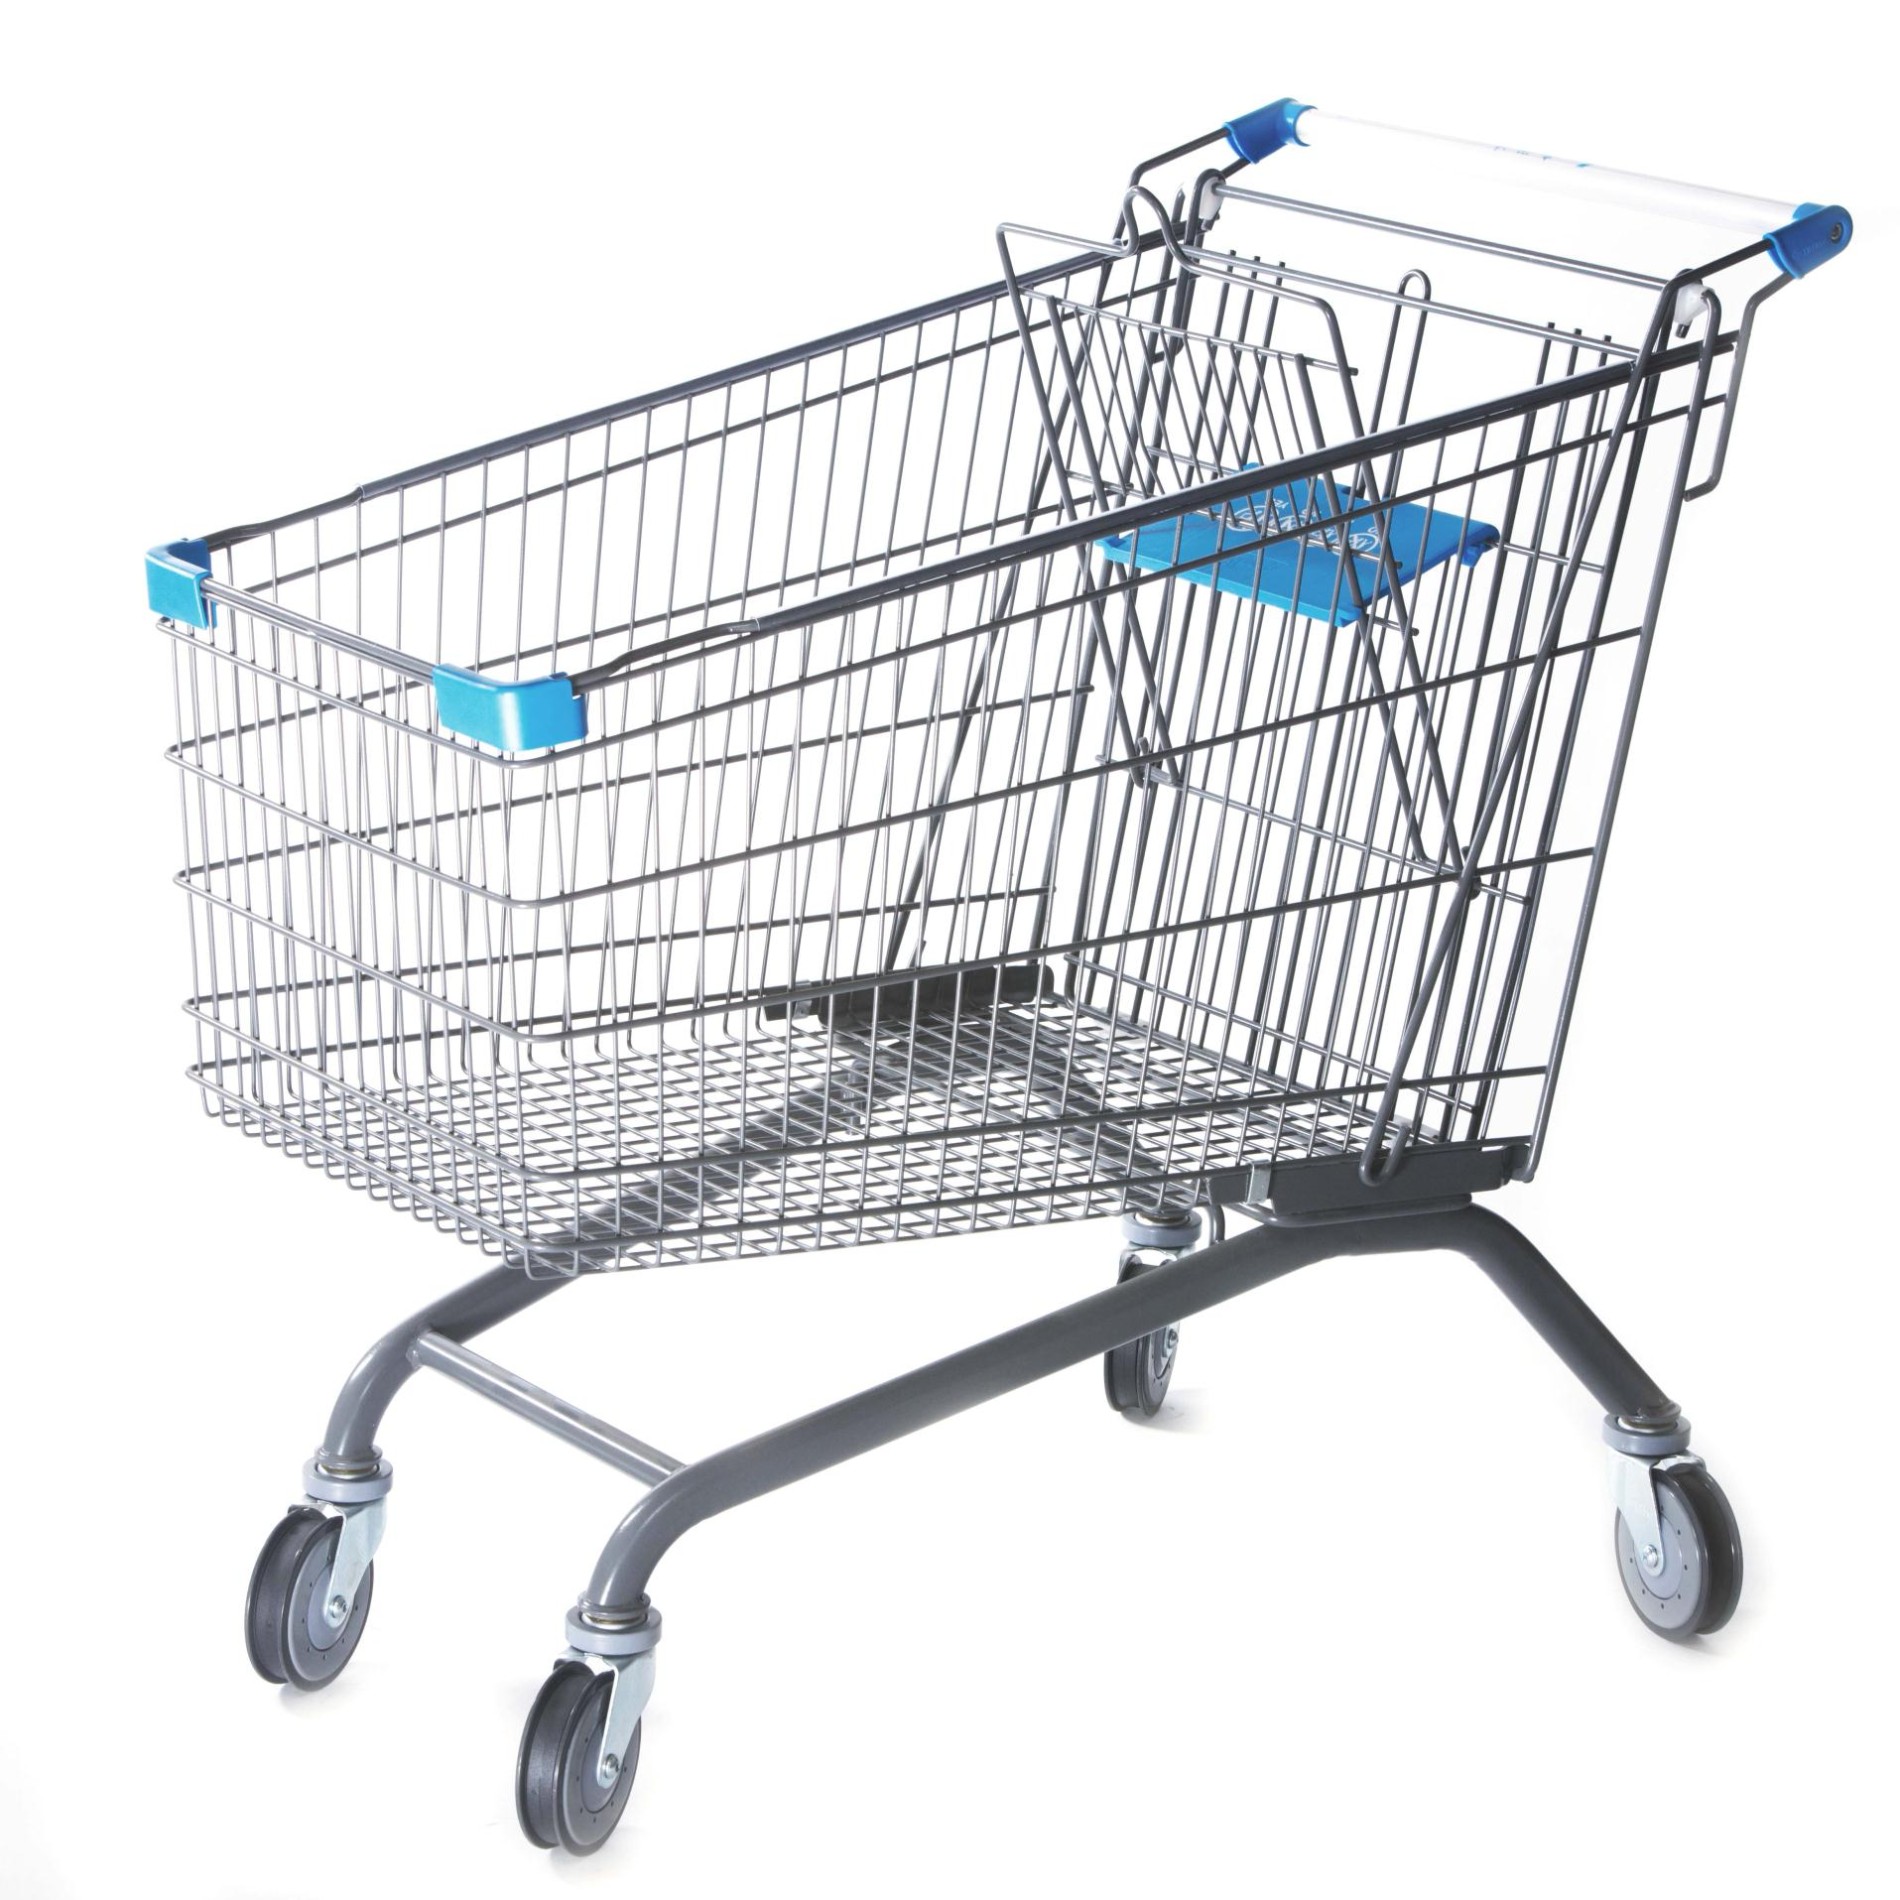 Large Capacity Shopping Trolley 